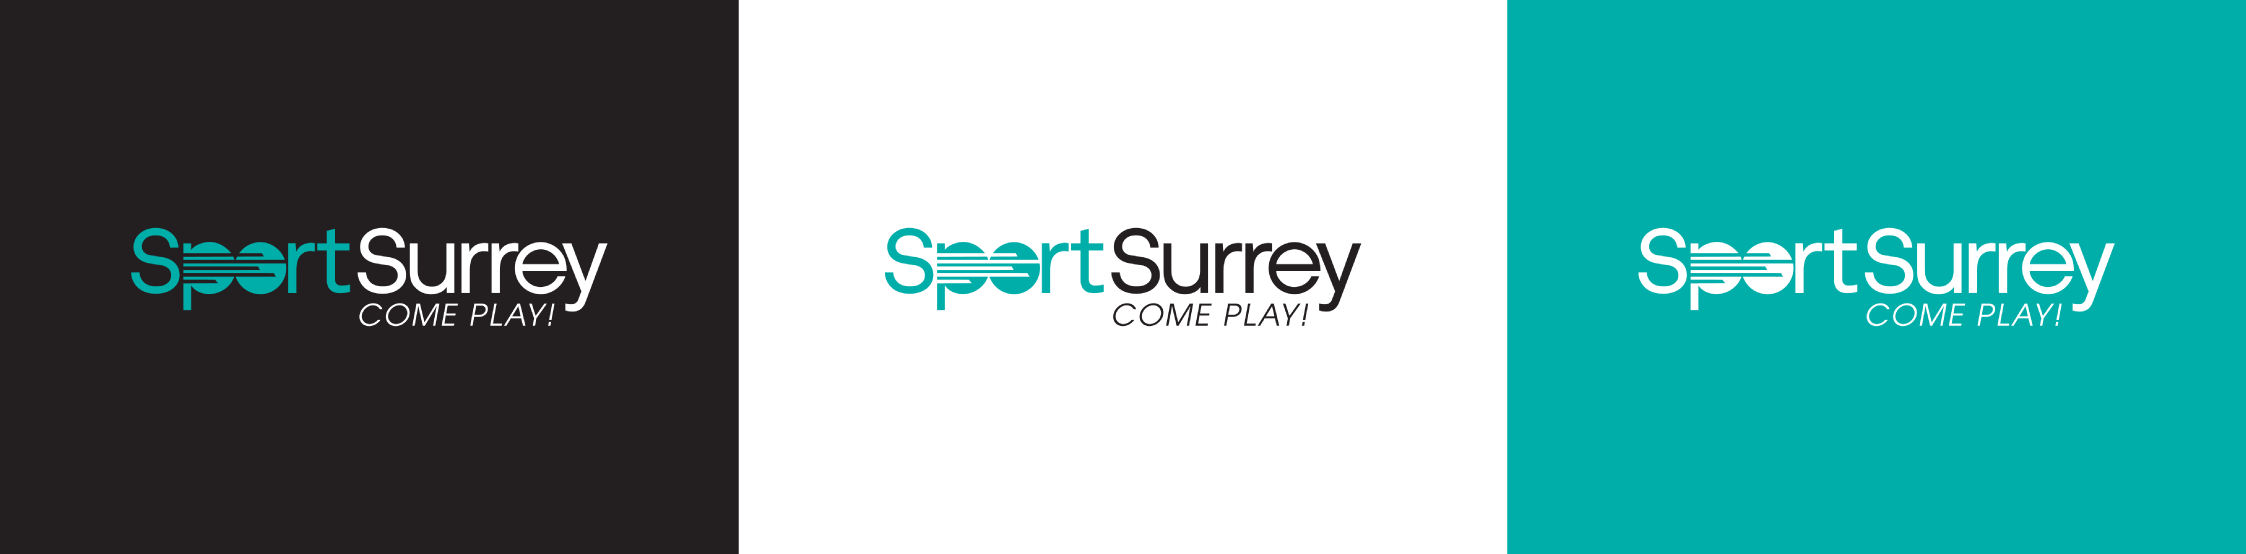 Versions of Sport Surrey's rebrand featuring three colour pallets (Black, white, teal)